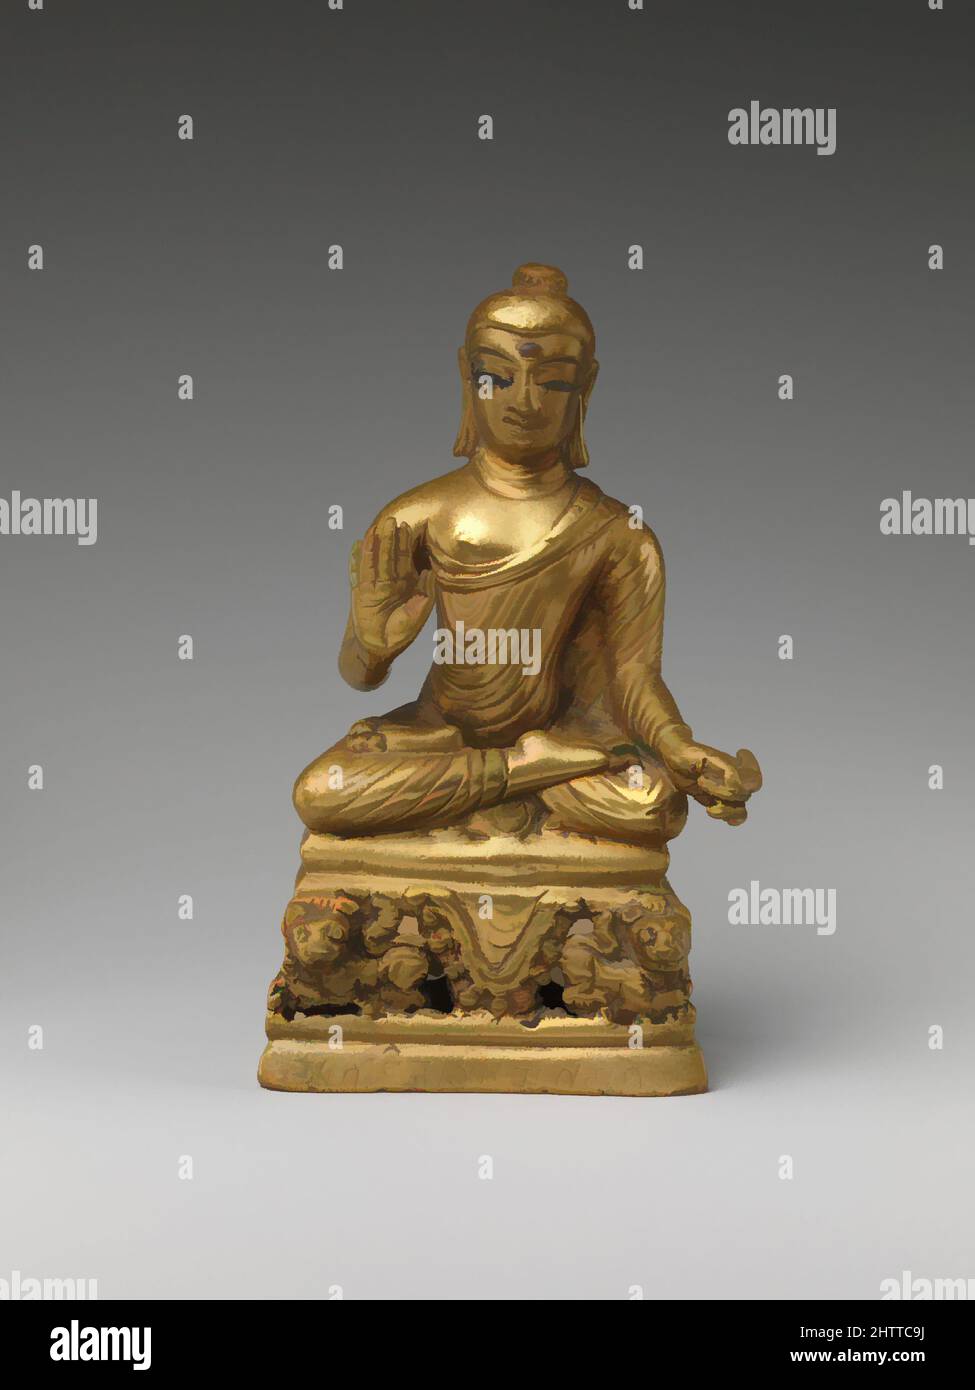 Art inspired by Seated Shakyamuni, 9th century, India (Jammu & Kashmir, ancient kingdom of Kashmir), Bronze, H. 6 5/8 × W. 3 in. (16.8 × 7.6 cm), Sculpture, Classic works modernized by Artotop with a splash of modernity. Shapes, color and value, eye-catching visual impact on art. Emotions through freedom of artworks in a contemporary way. A timeless message pursuing a wildly creative new direction. Artists turning to the digital medium and creating the Artotop NFT Stock Photo